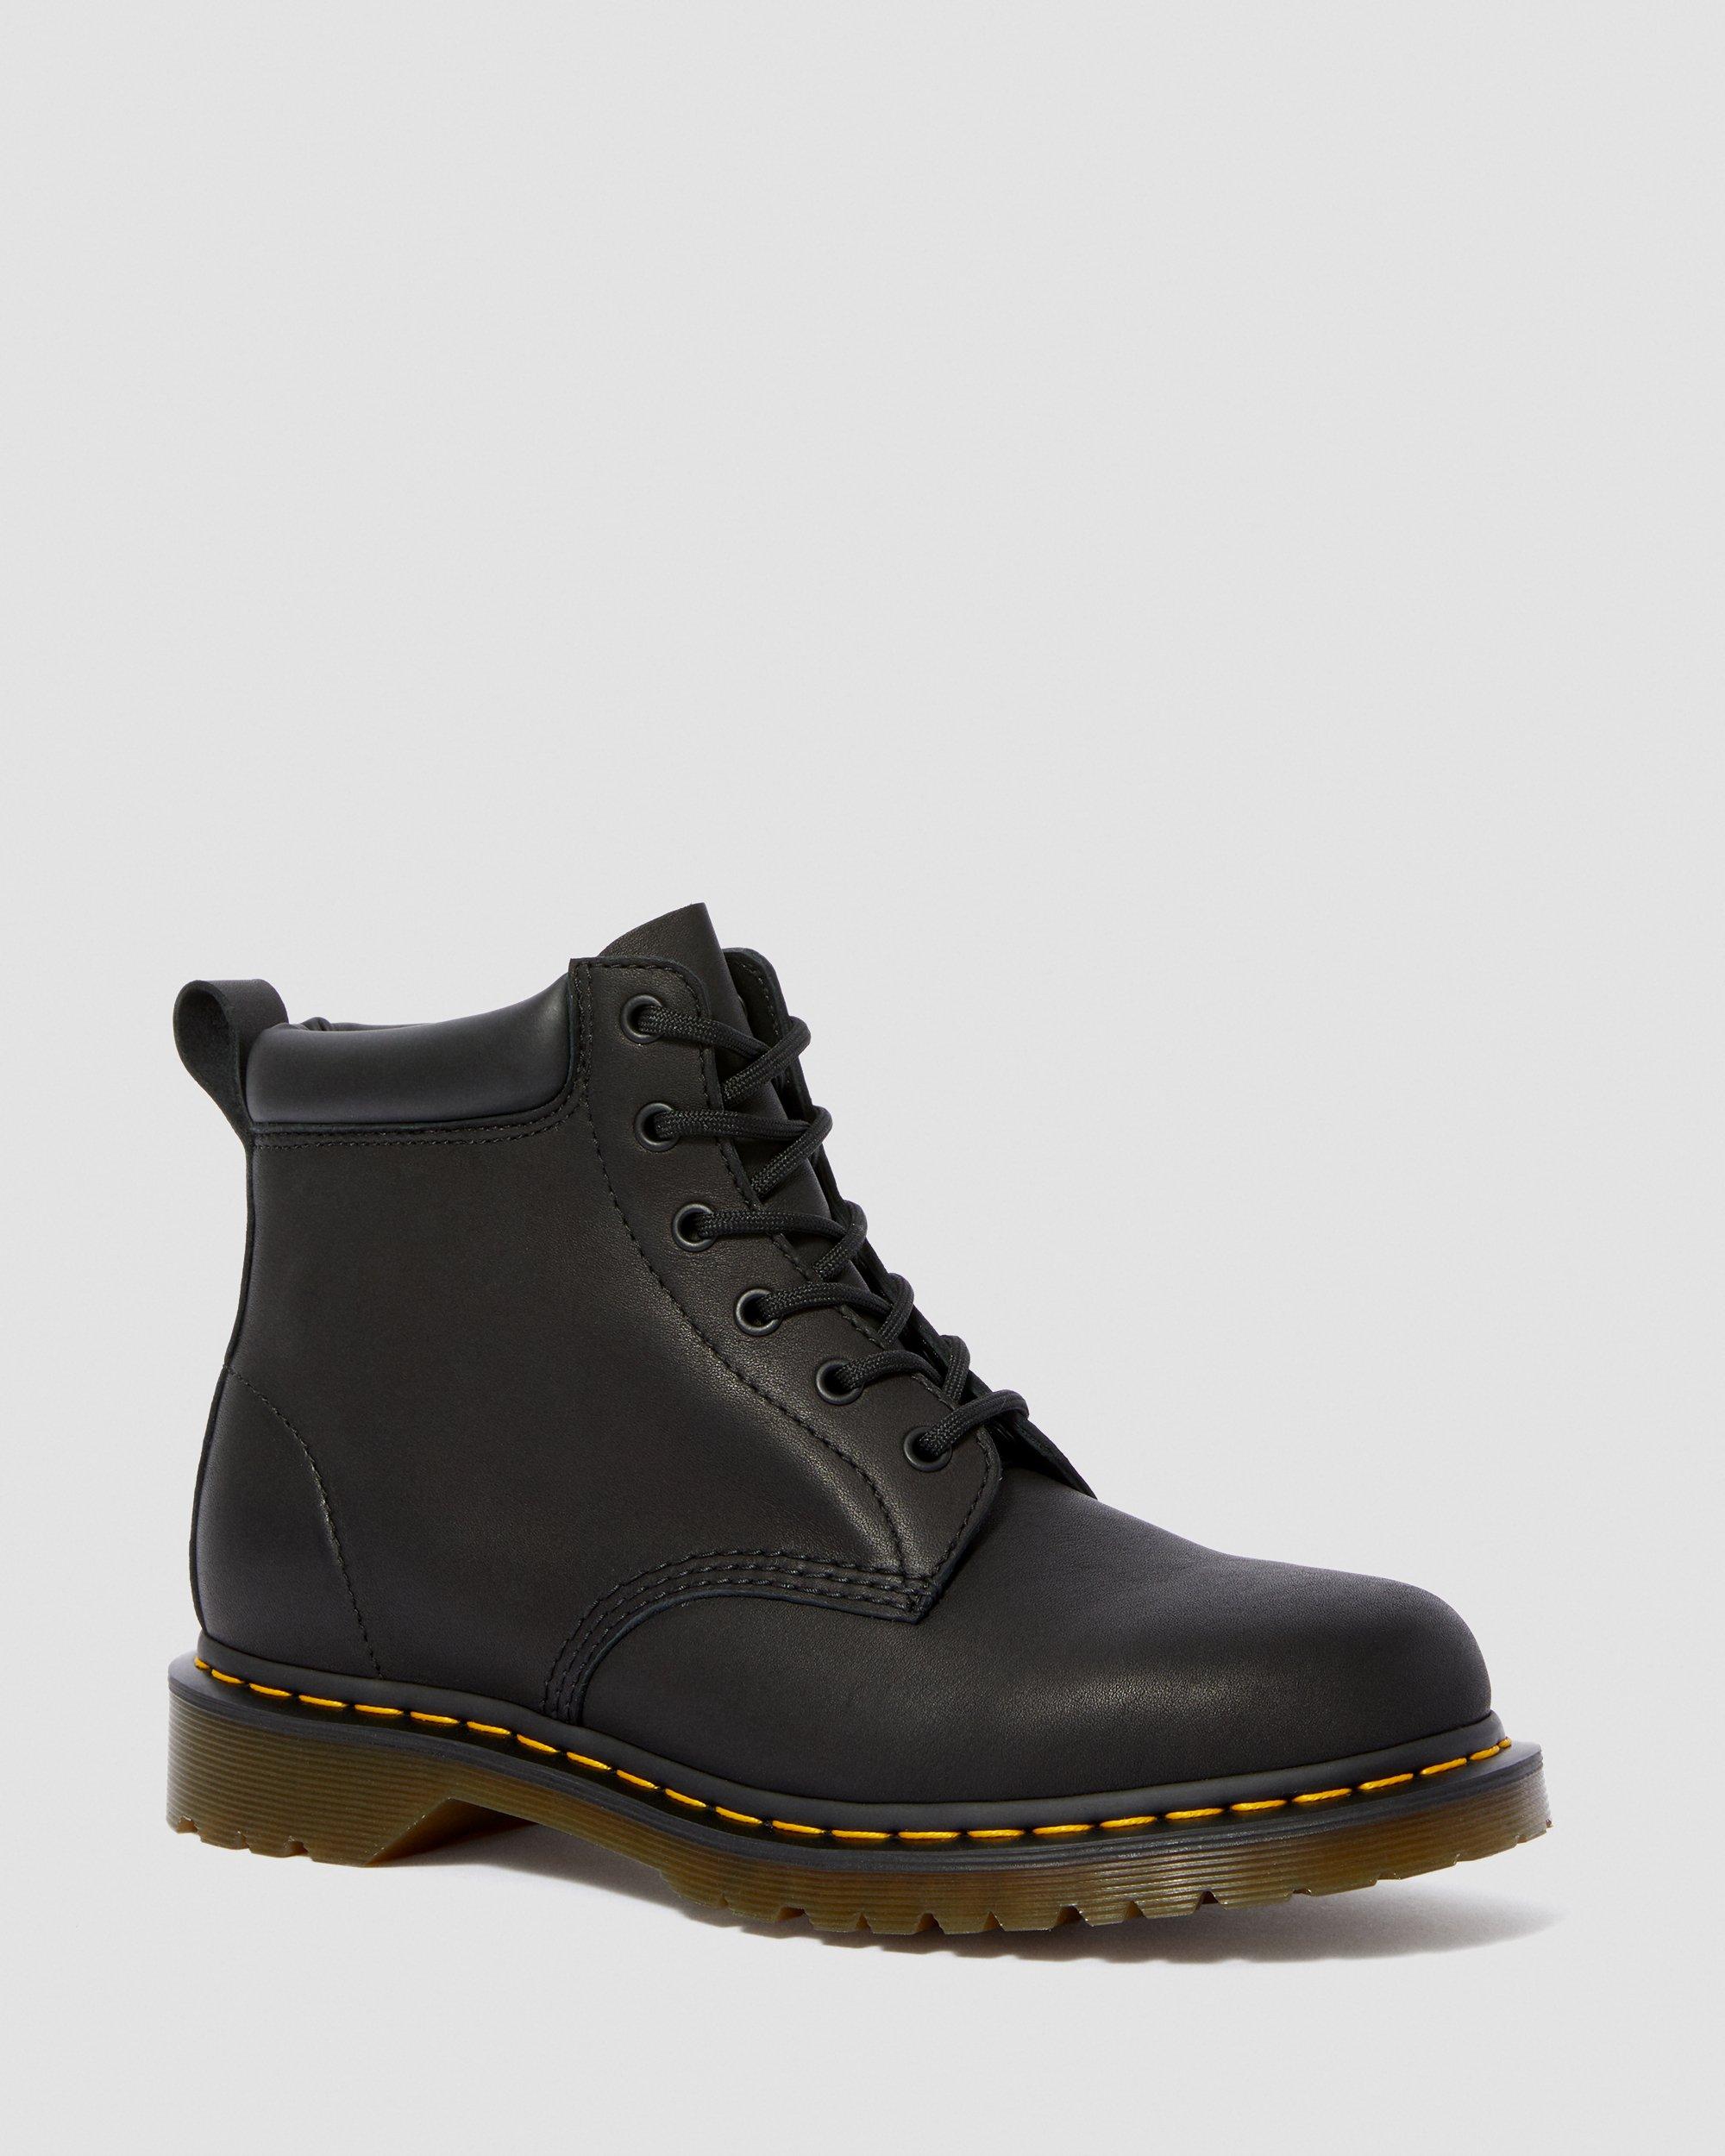 939 Ben Boot Leather Lace Up Boots Dr. Martens